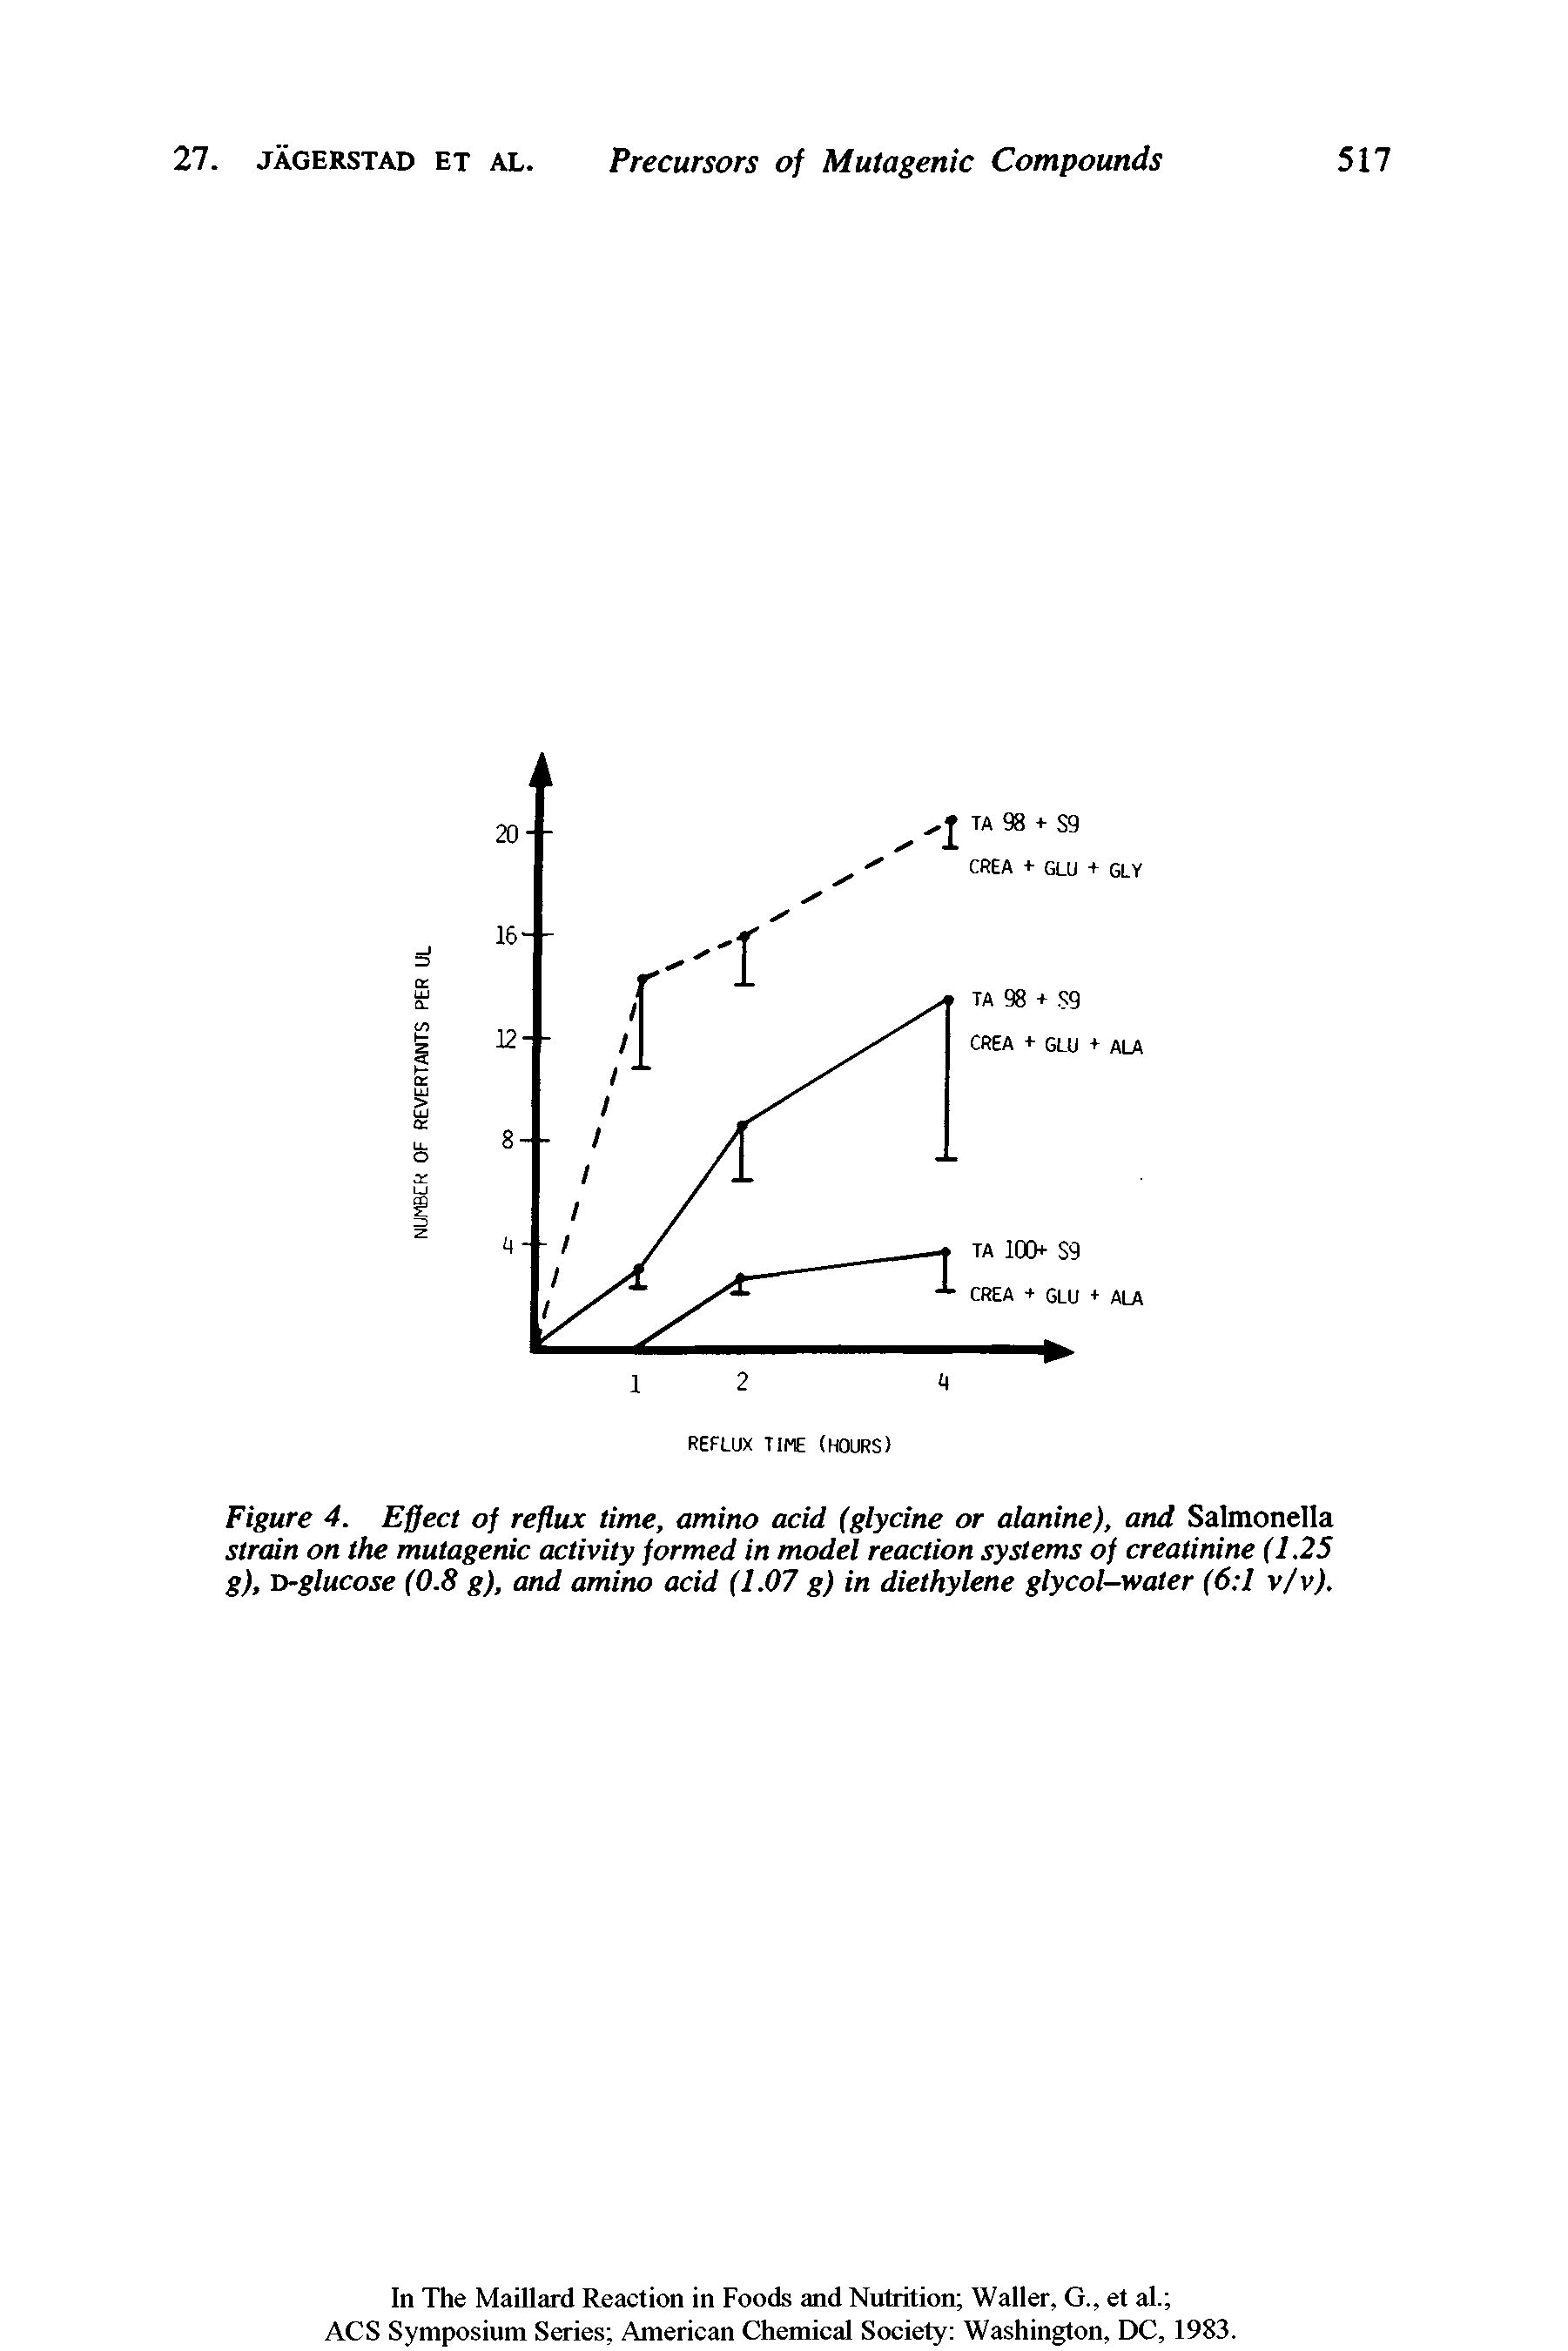 Figure 4. Effect of reflux time, amino acid (glycine or alanine), and Salmonella strain on the mutagenic activity formed in model reaction systems of creatinine (1.25 g), o-glucose (0.8 g), and amino acid (1.07 g) in diethylene glycol-water (6 1 v/v).